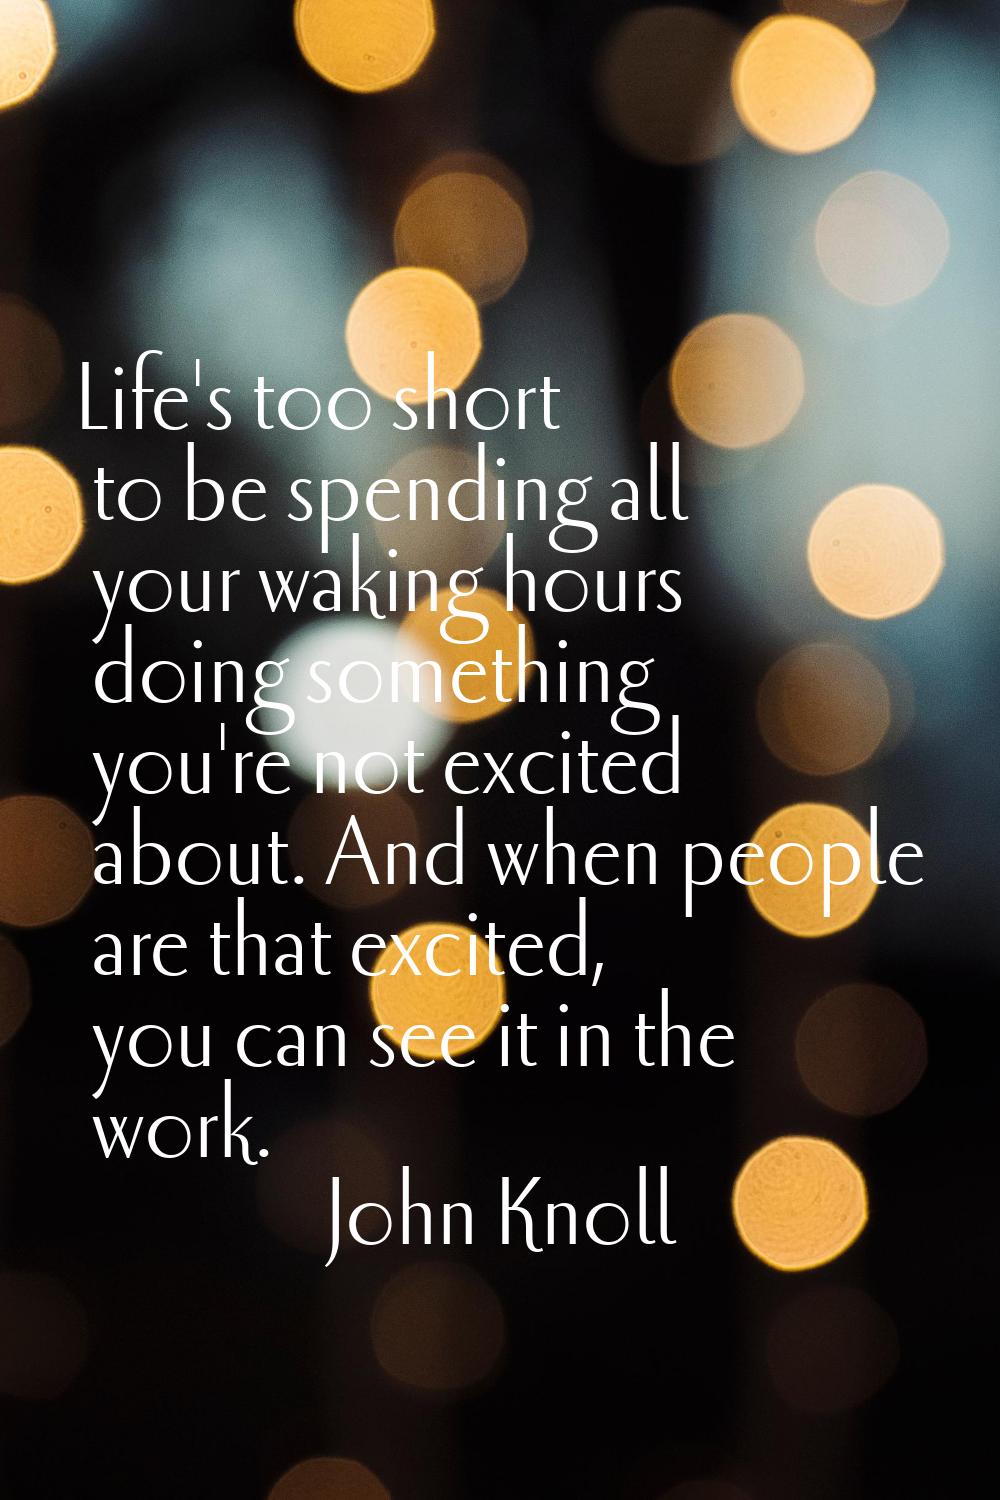 Life's too short to be spending all your waking hours doing something you're not excited about. And